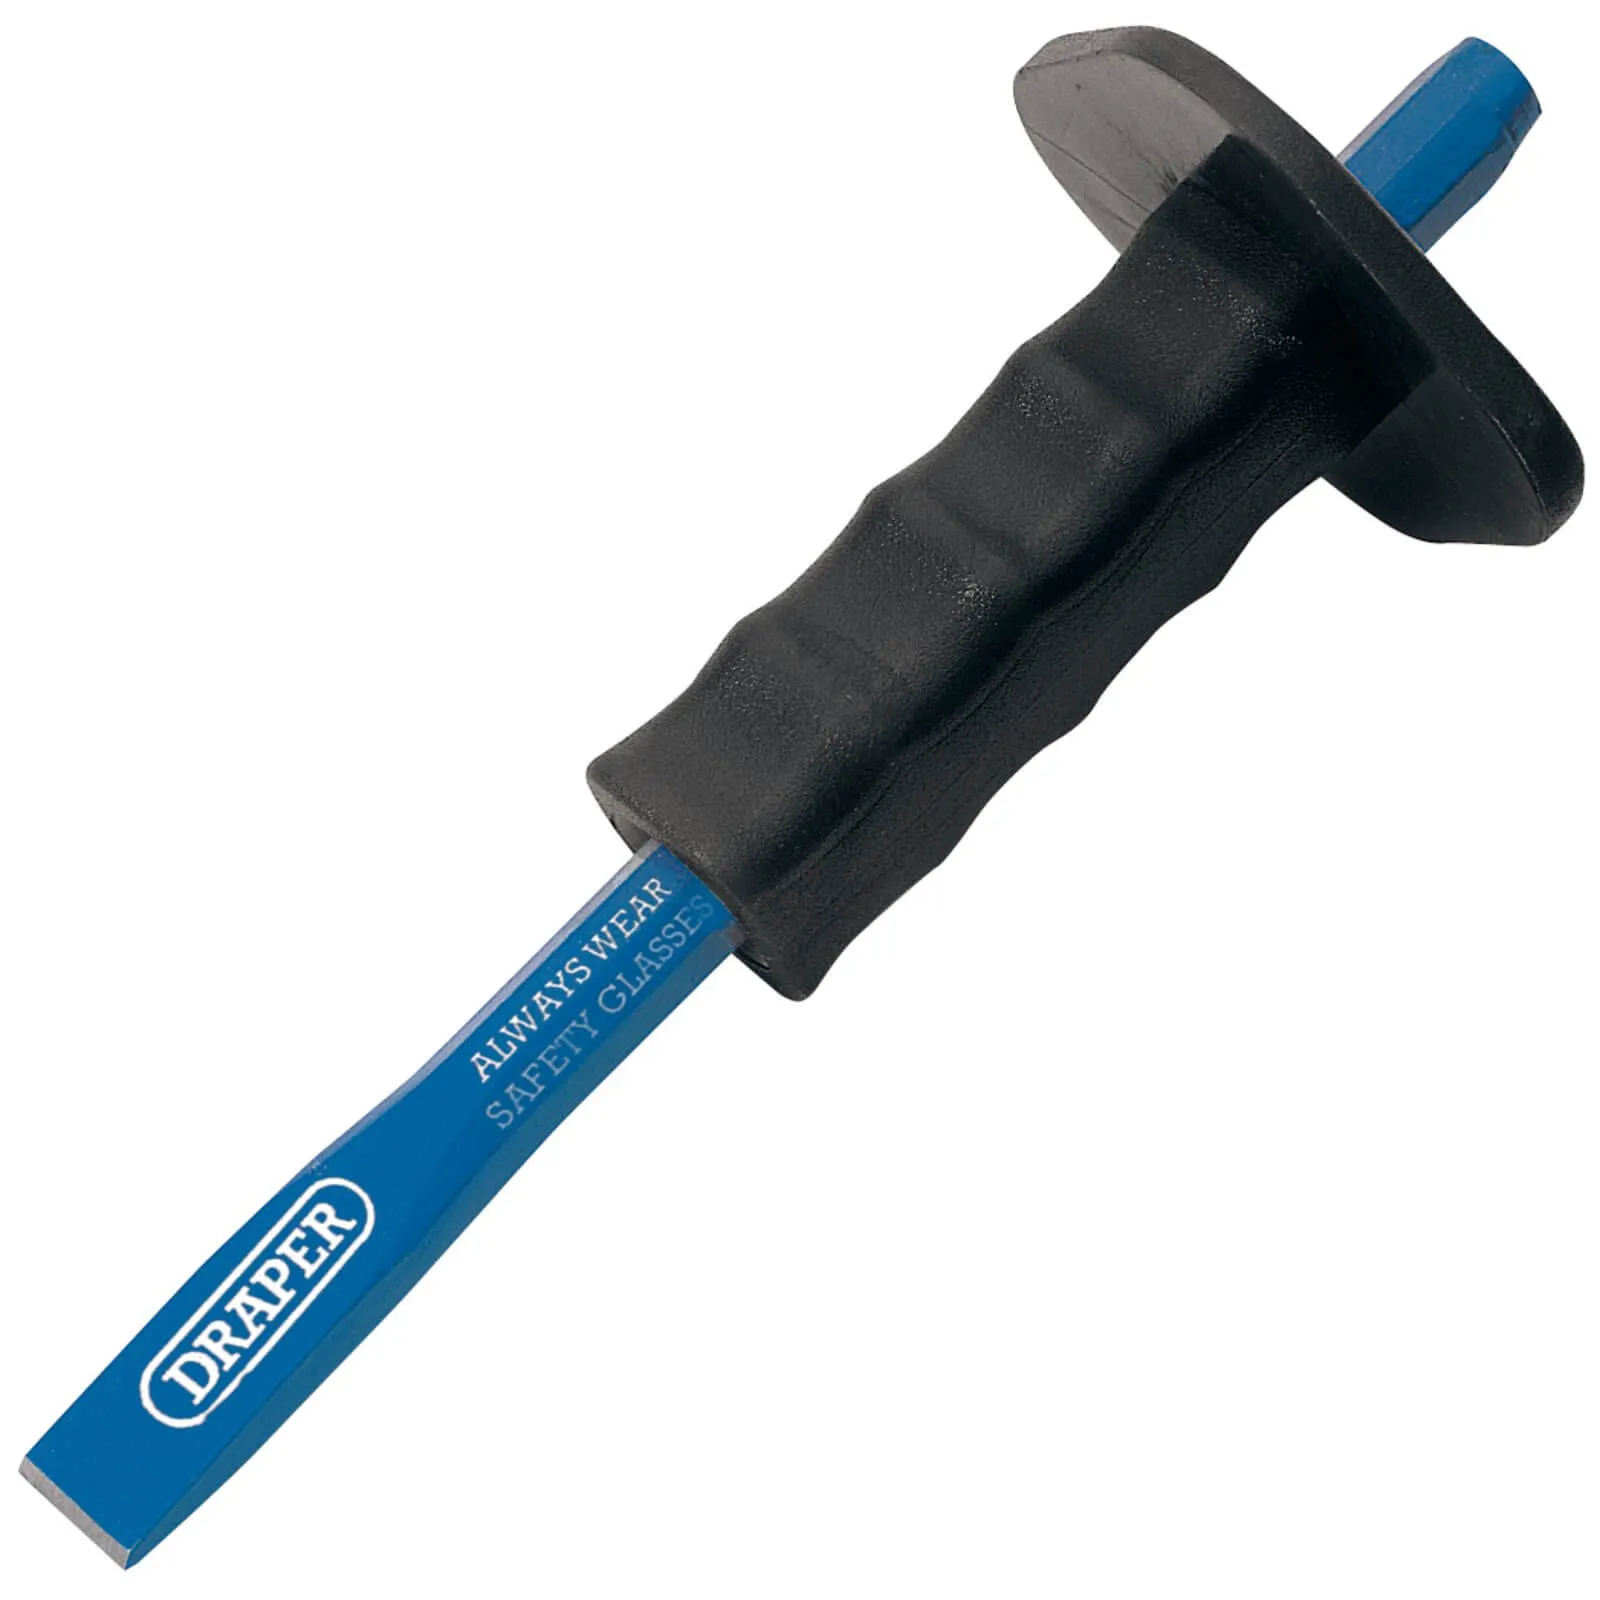 Draper Octagonal Shank Cold Chisel and Hand Guard - 250mm, 19mm